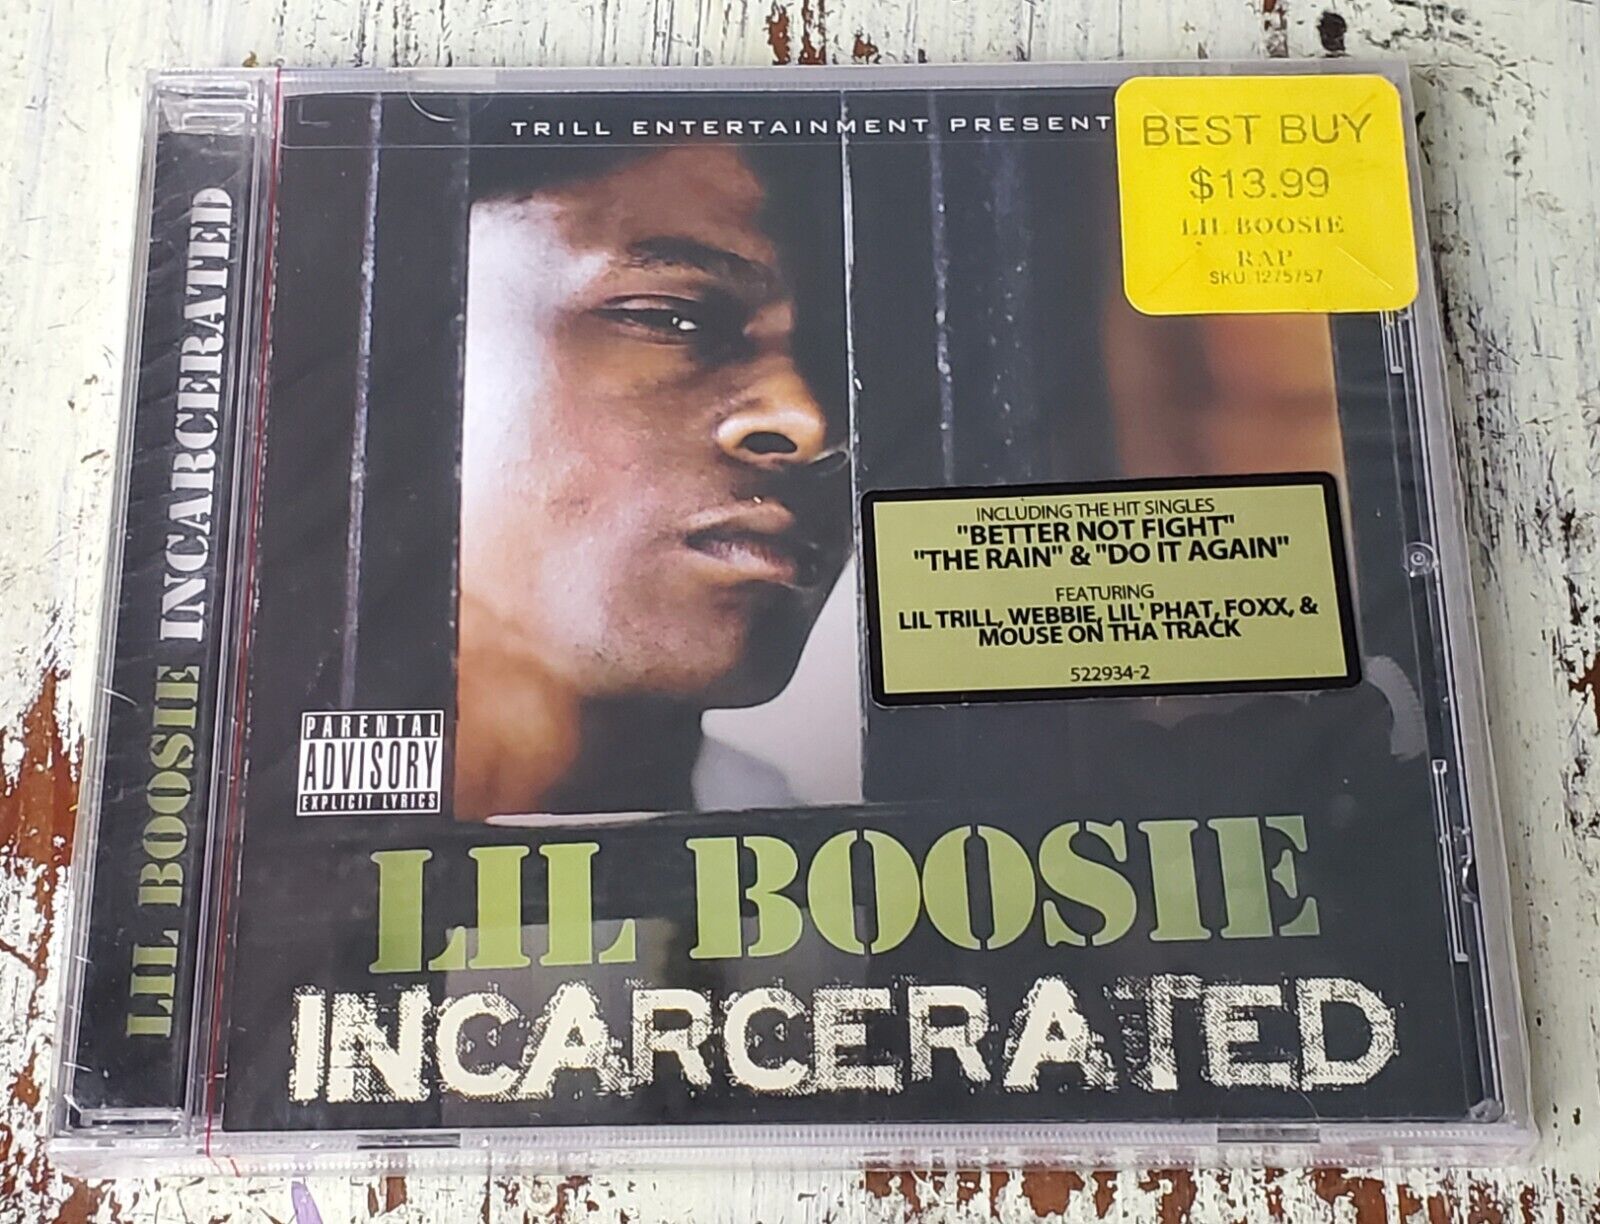 carrie graham recommends lil boosie movies download pic